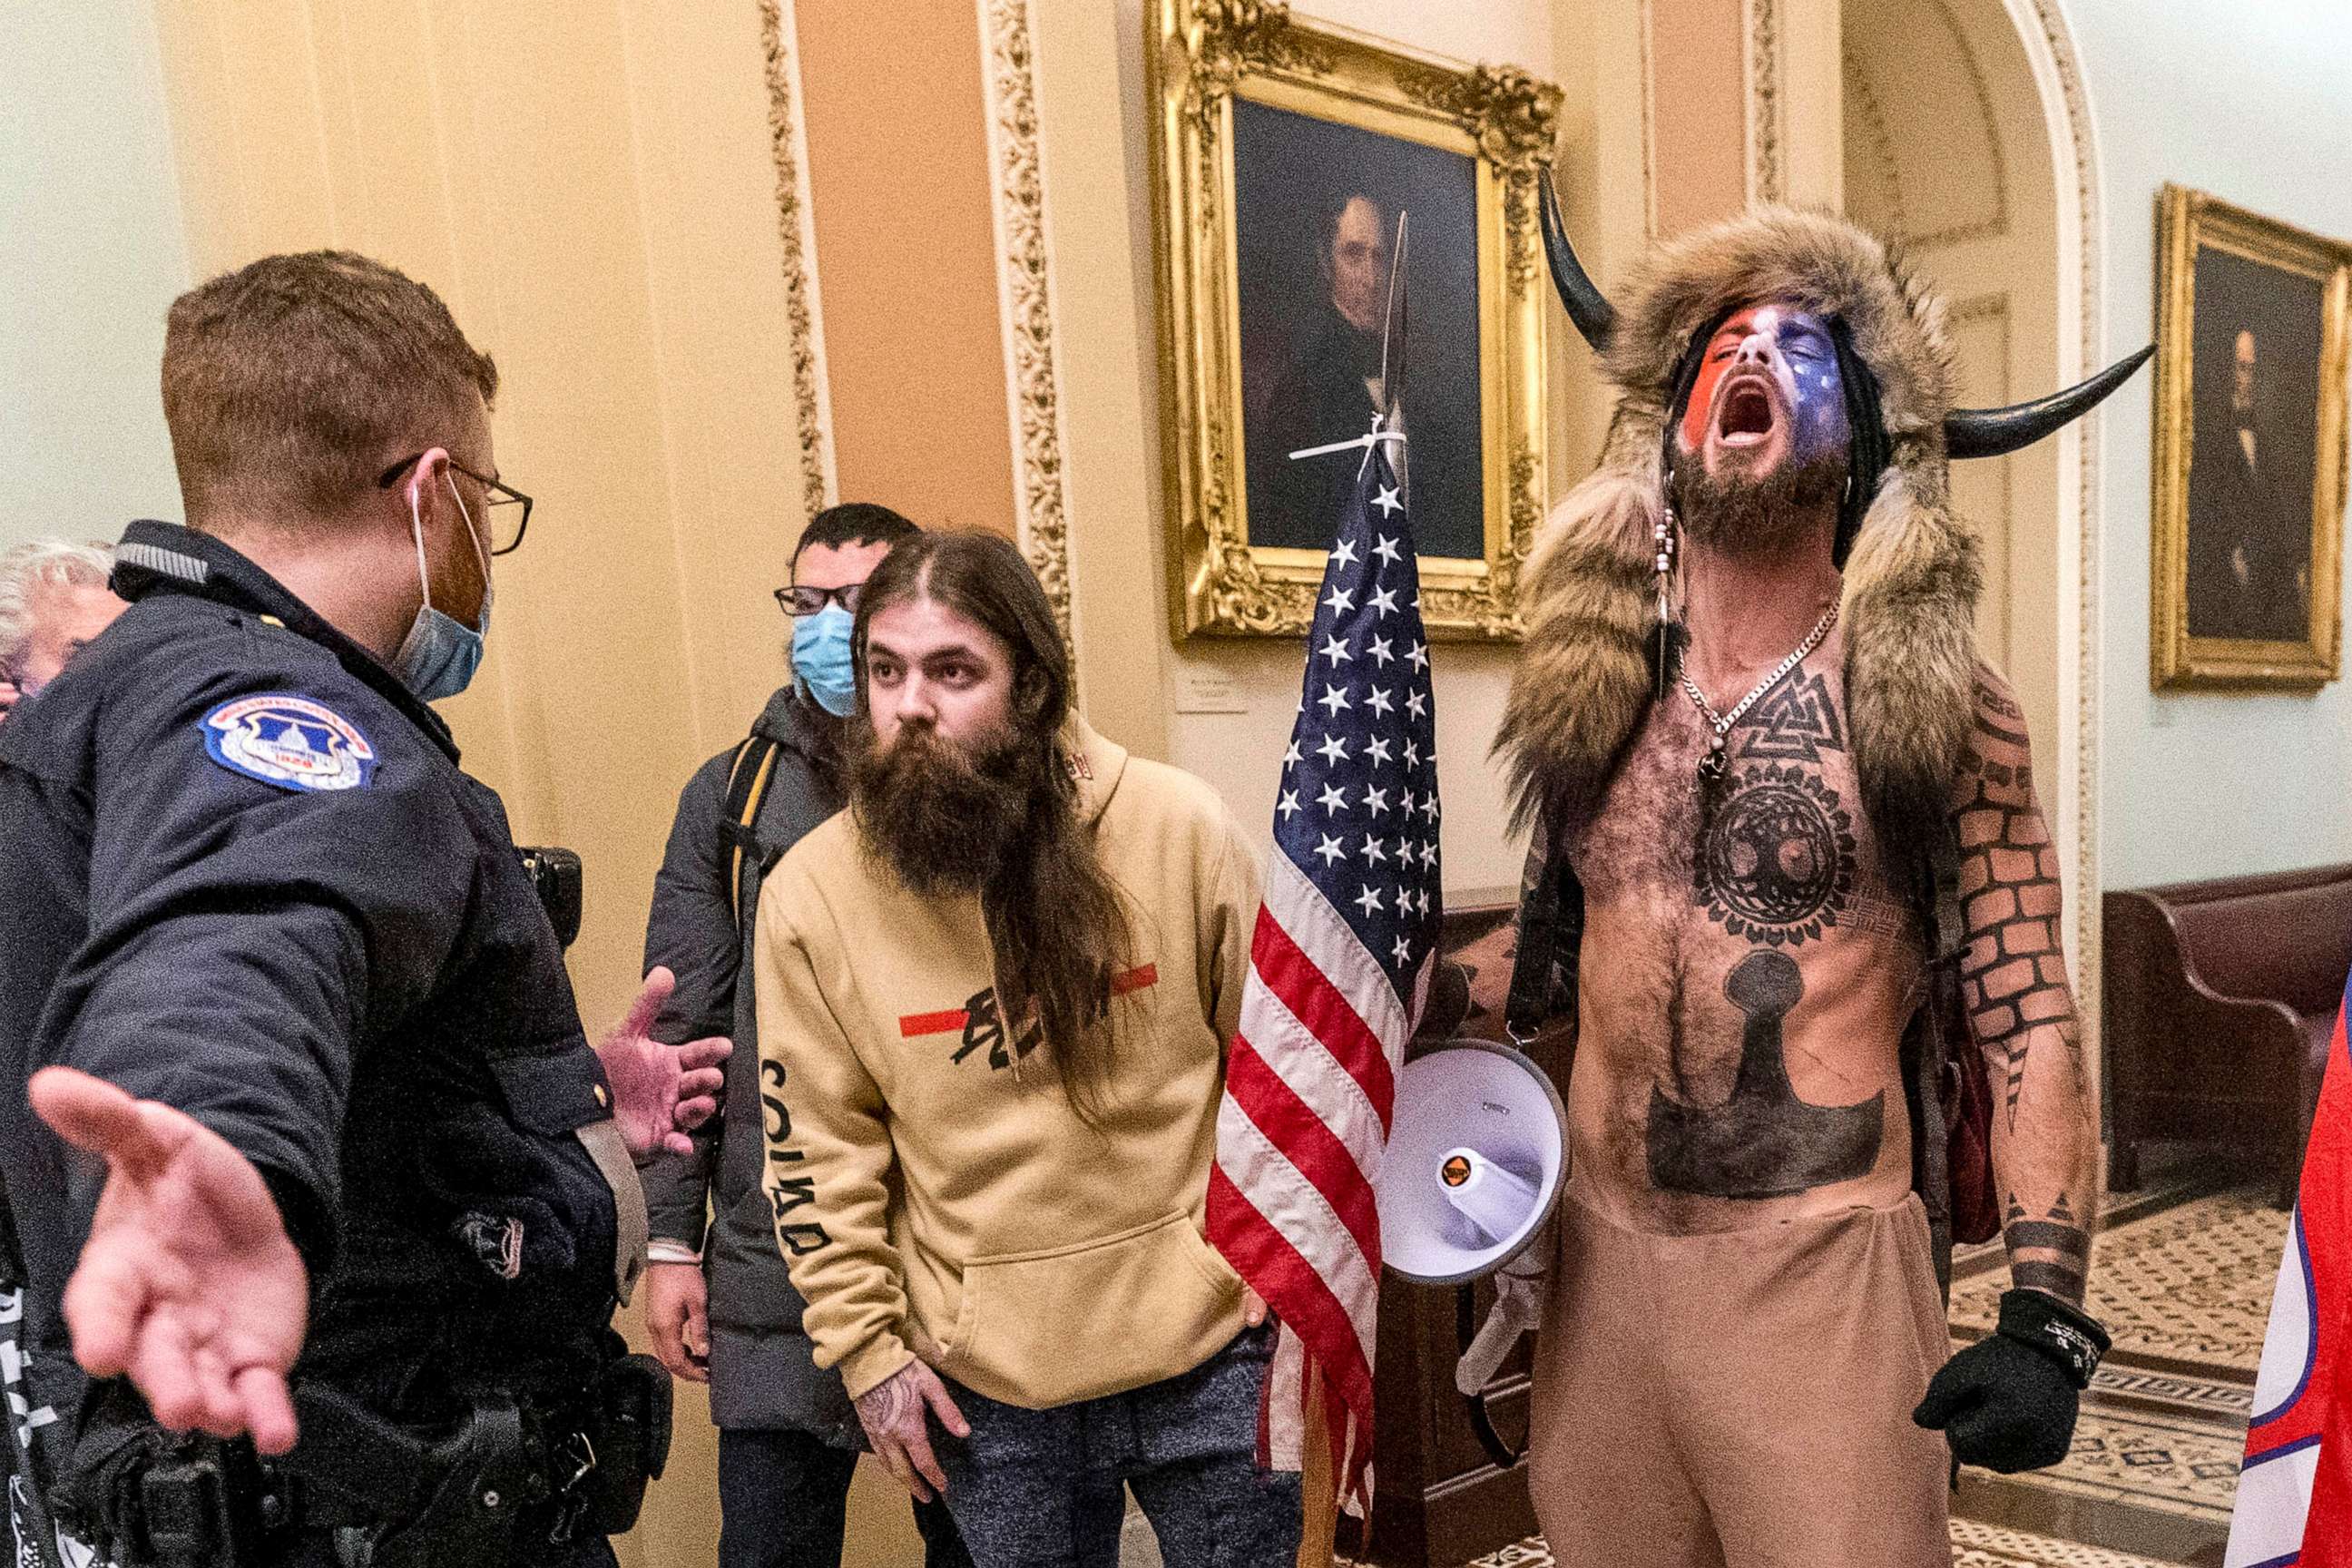 PHOTO: FILE - In this Jan. 6, 2021 file photo, supporters of President Donald Trump, including Jacob Chansley, right with fur hat, are confronted by U.S. Capitol Police officers outside the Senate Chamber inside the Capitol in Washington.